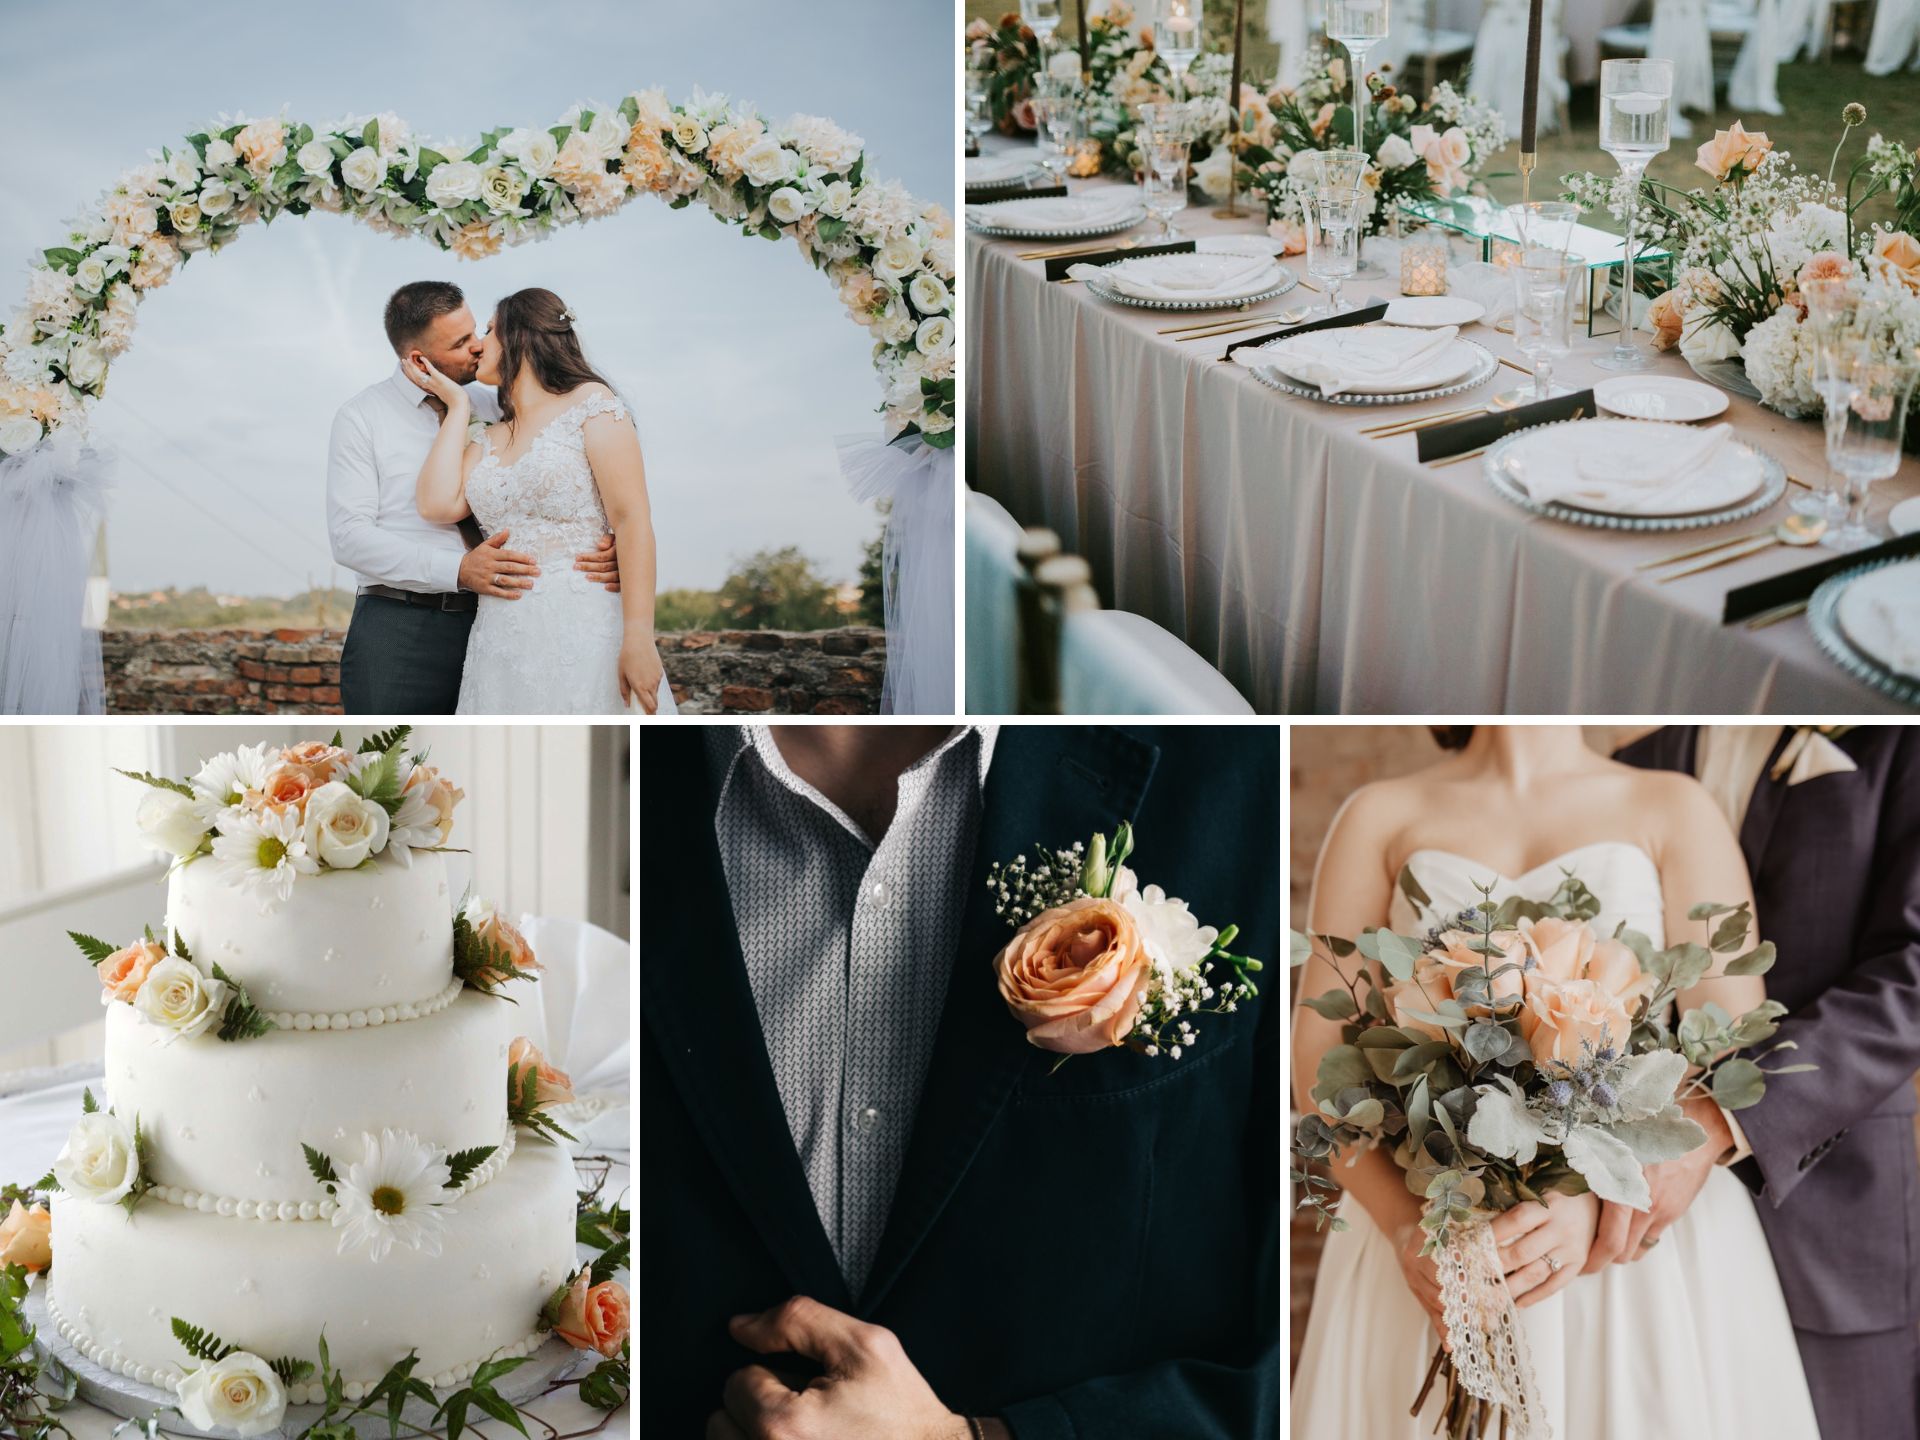 A photo collage with spring wedding color ideas.